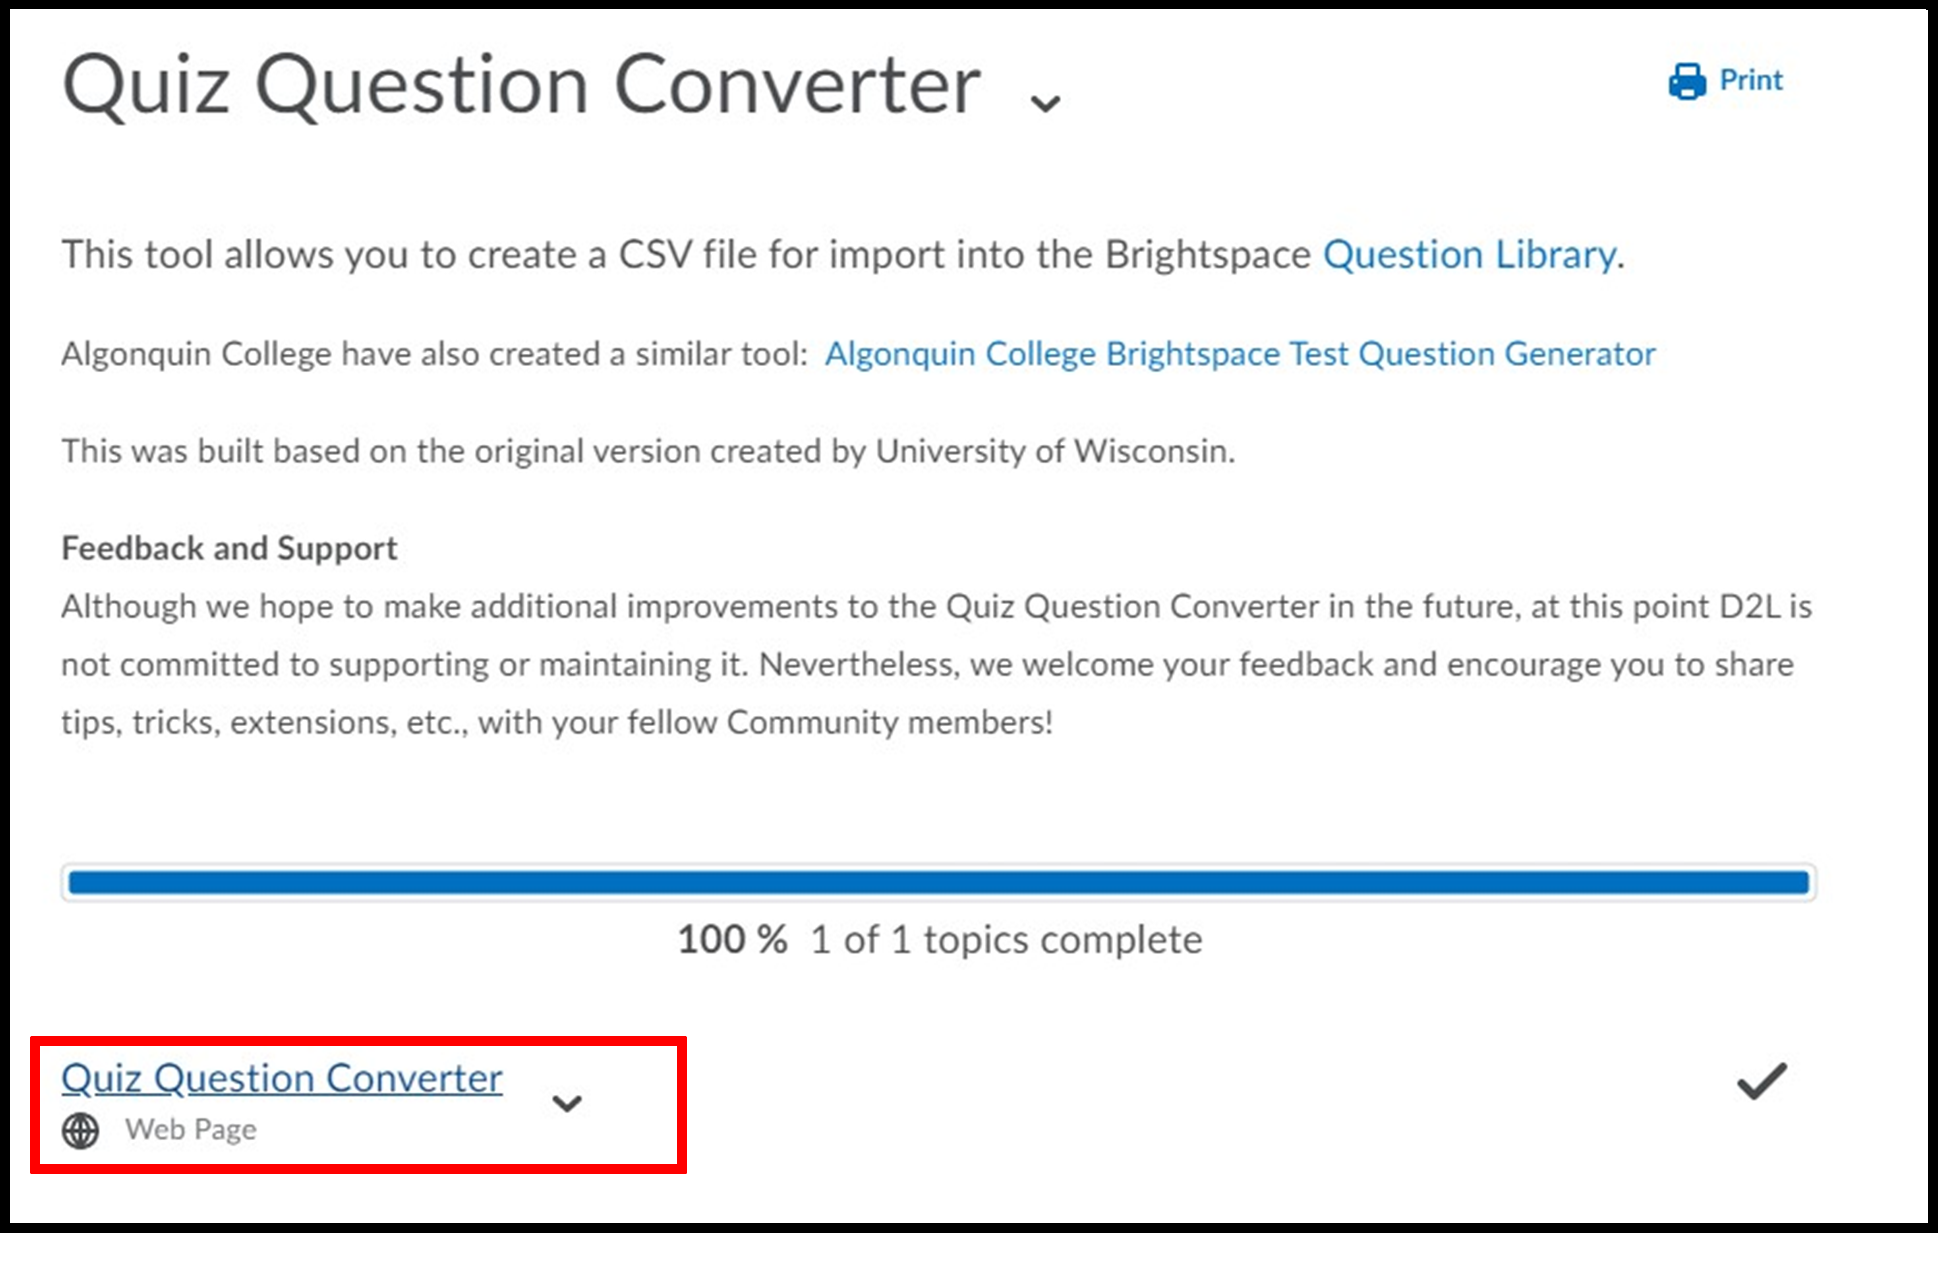 The Quiz Question Converter link will lead you to a Brightspace topic that gives a description of the tool and how it is used to create a CSV file for importing into the Brightspace Question Library. The link to the activity is at the bottom.